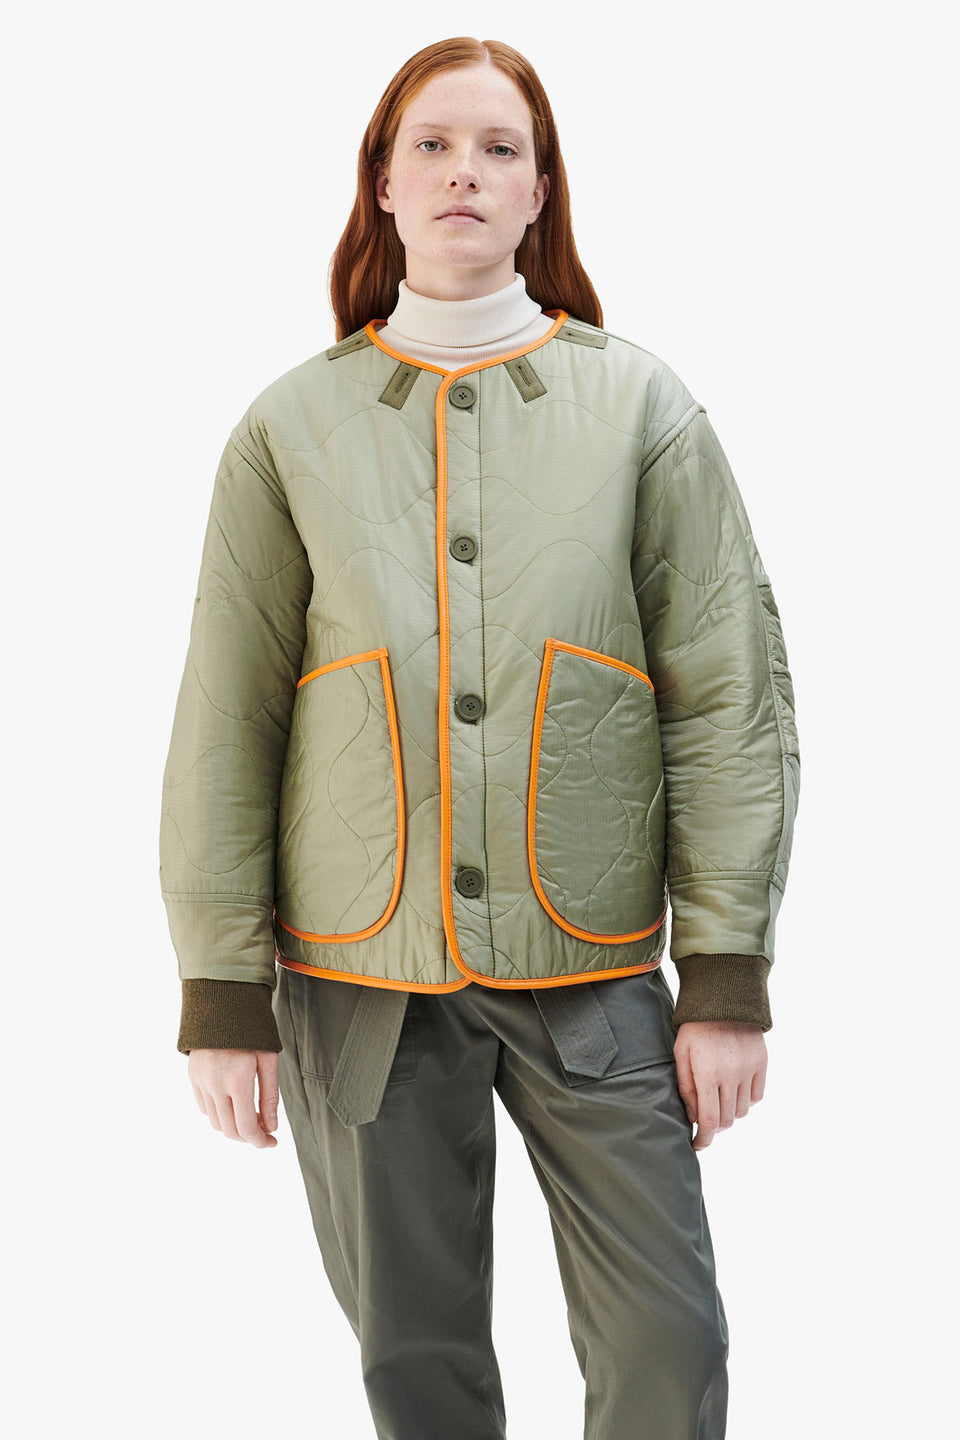 Shearling Leather Quilt Bomber - Orange / Pale Sage (listing page thumbnail)